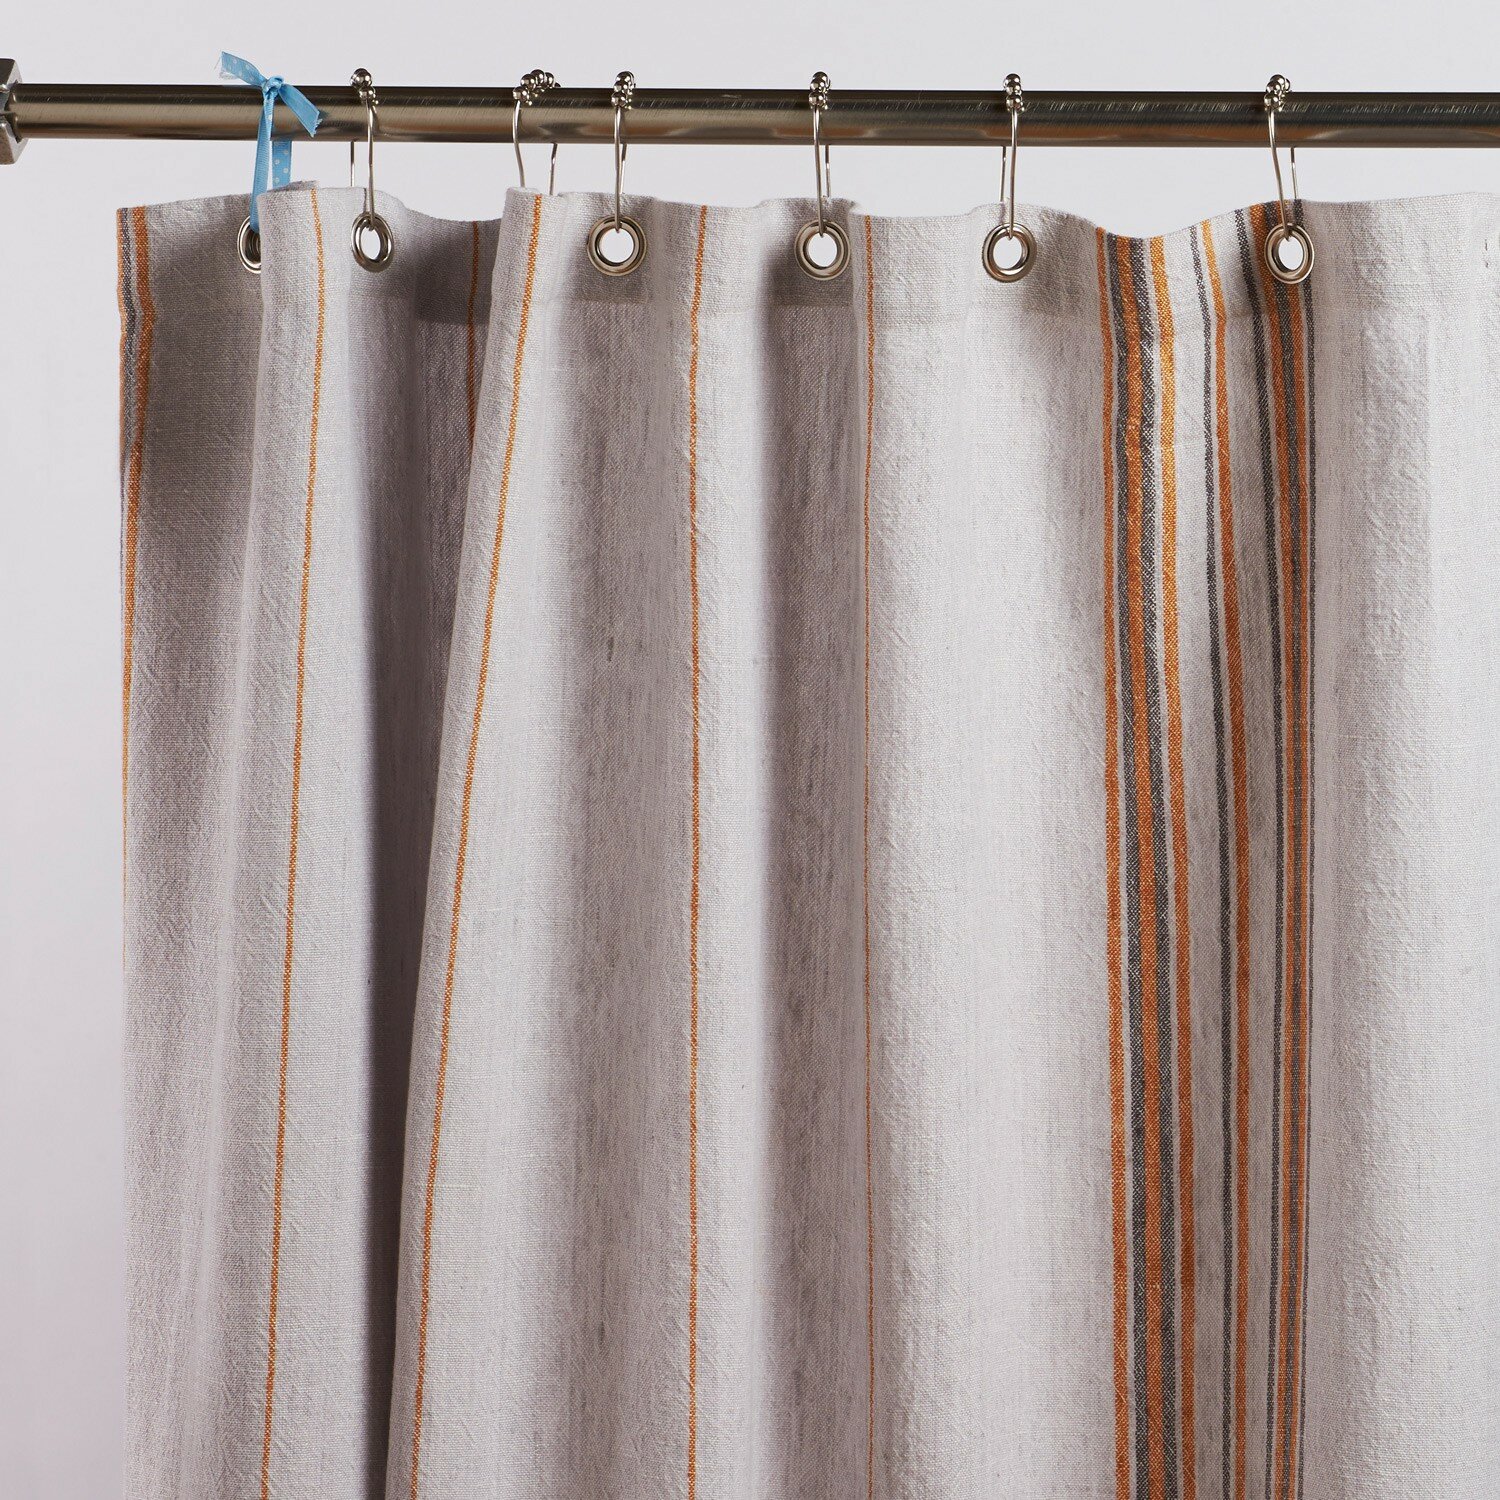 Extendable Shower Curtain Rod | Short Curved Shower Rod | Shower Curtain Tension Rod